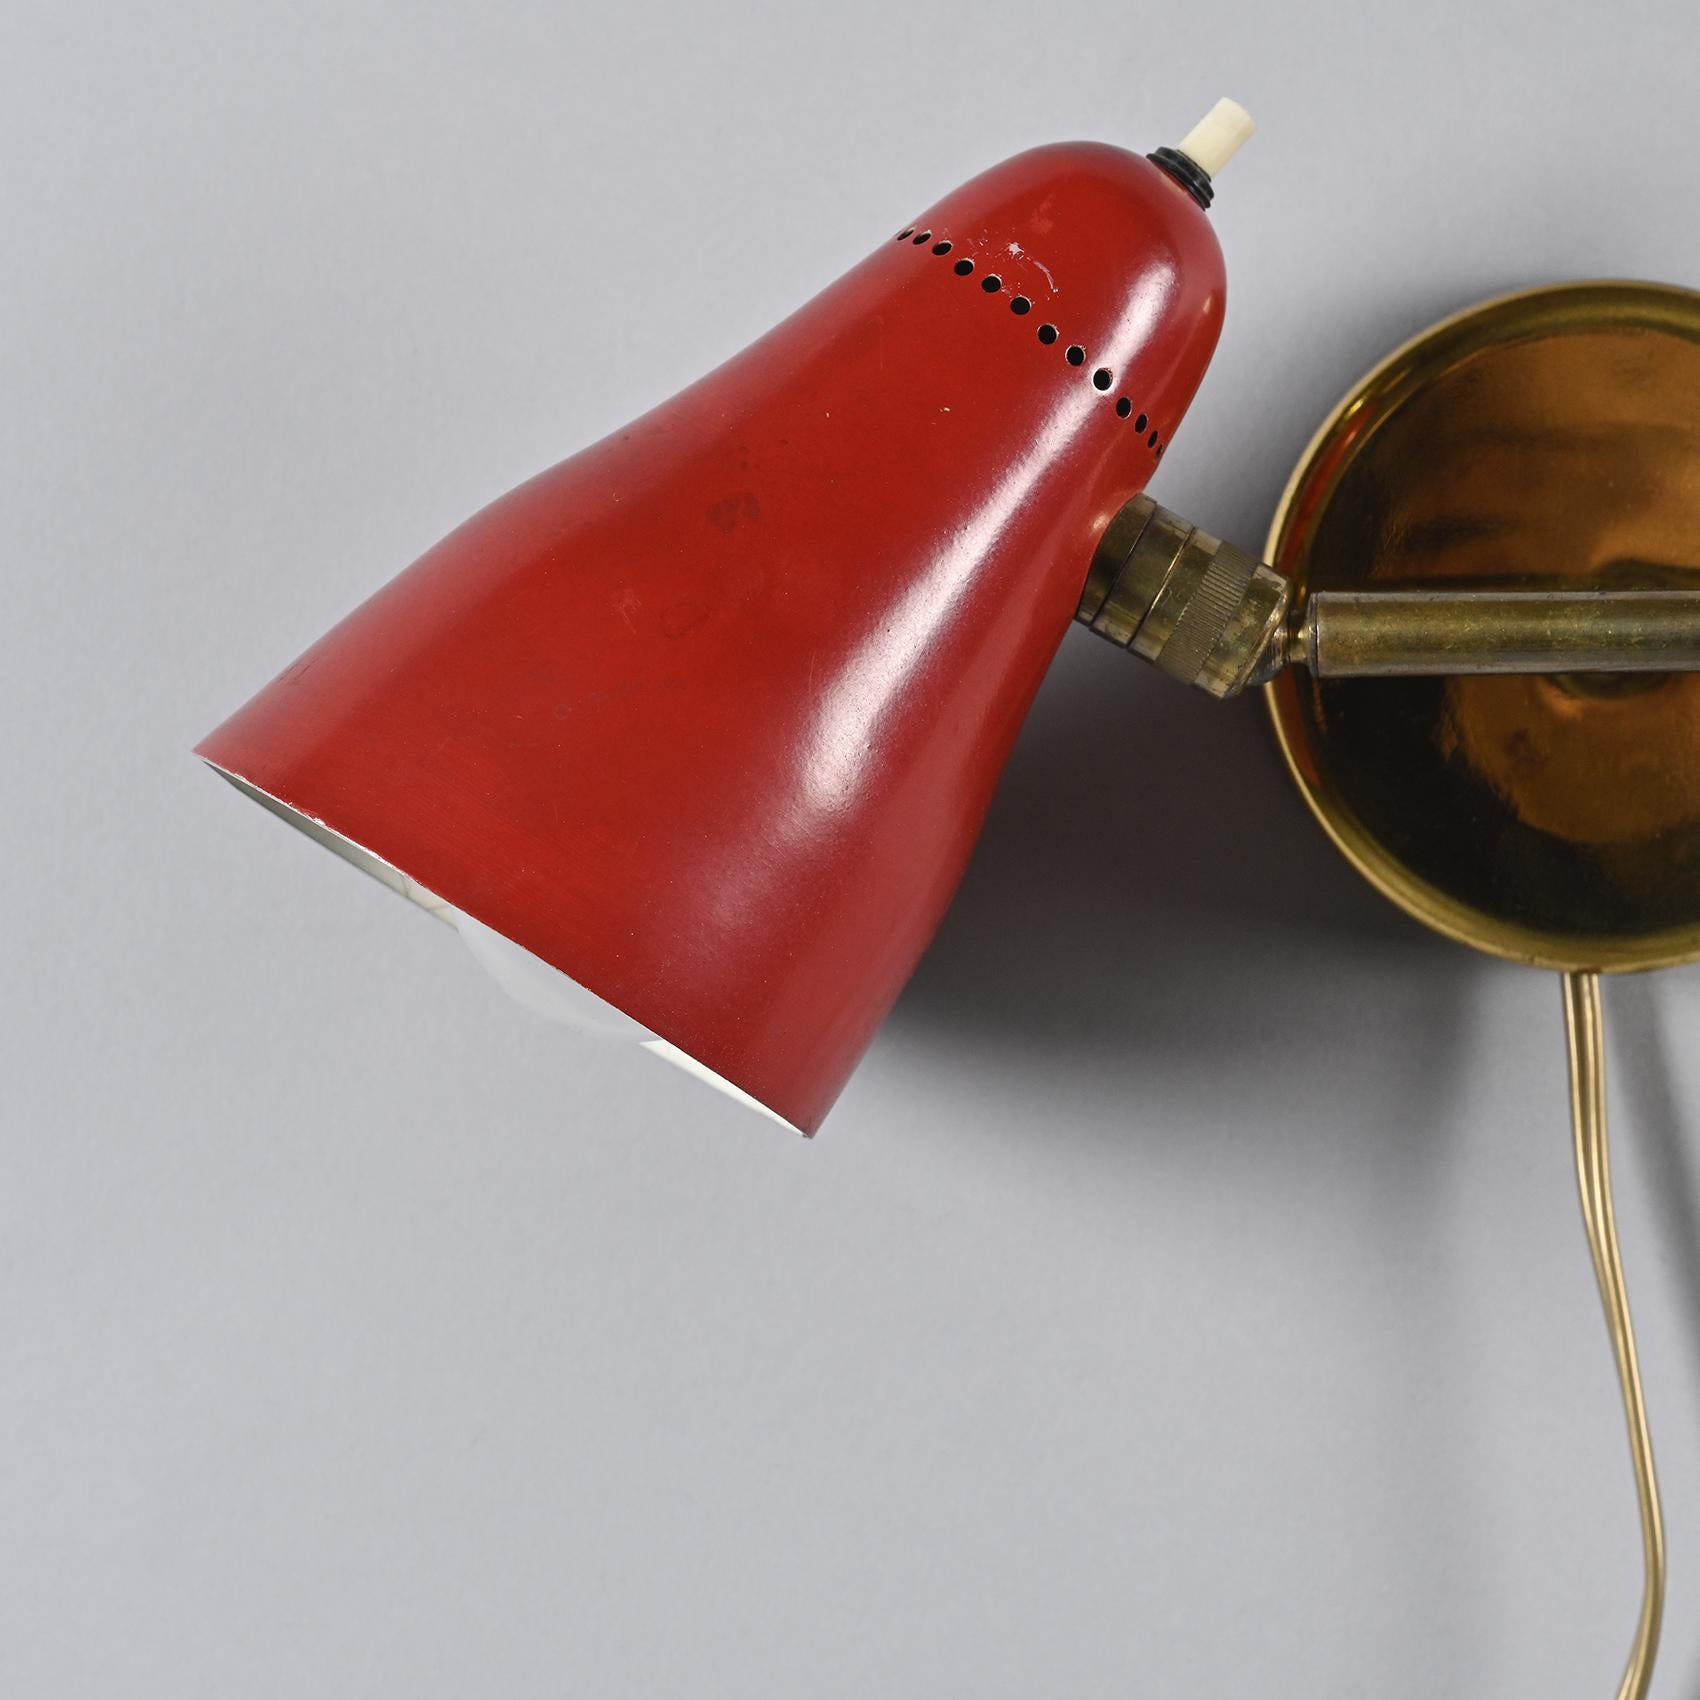 Sconce with a circular base in gilded brass, designed by Giuseppe Ostuni in the 1950s for O'Luce.

The base features a conical stem ending with two joints that hold two conical reflectors in cream lacquered metal. The perforated metal detail adds a